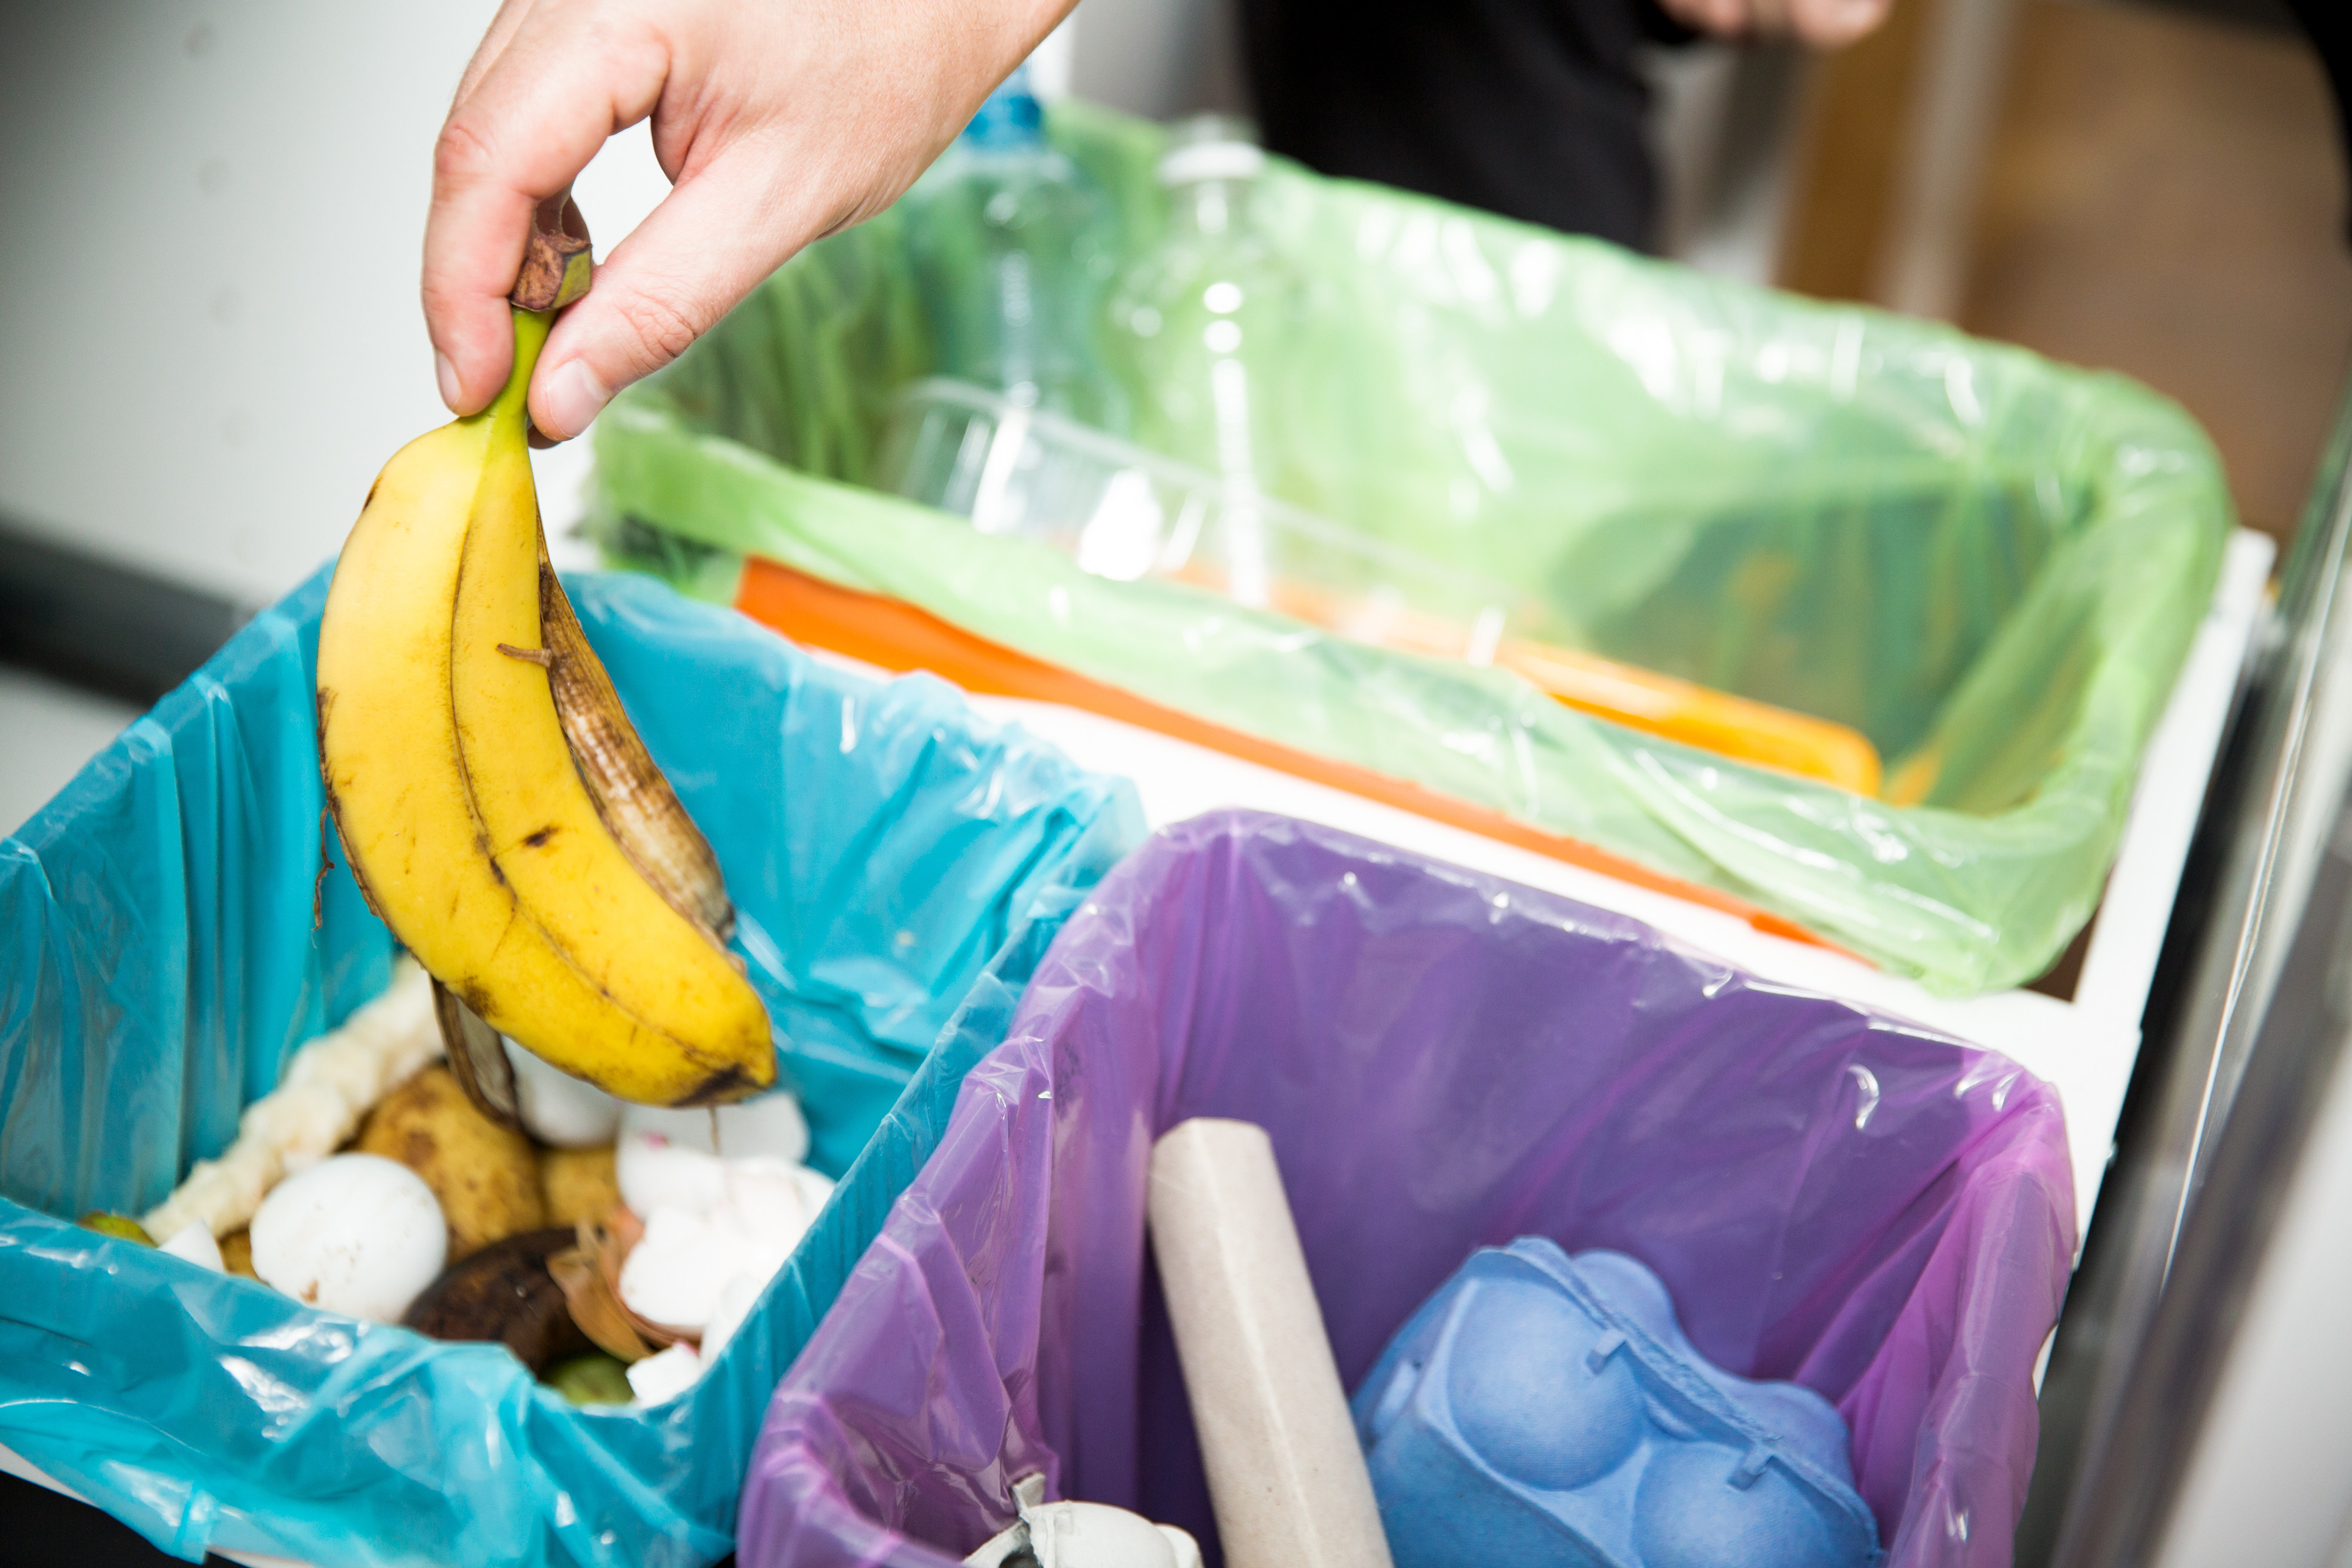 One reader says that Hong Kong residents have been slow to embrace food waste recycling due to the absence of incentives and impractical guidelines. Photo: Shutterstock 